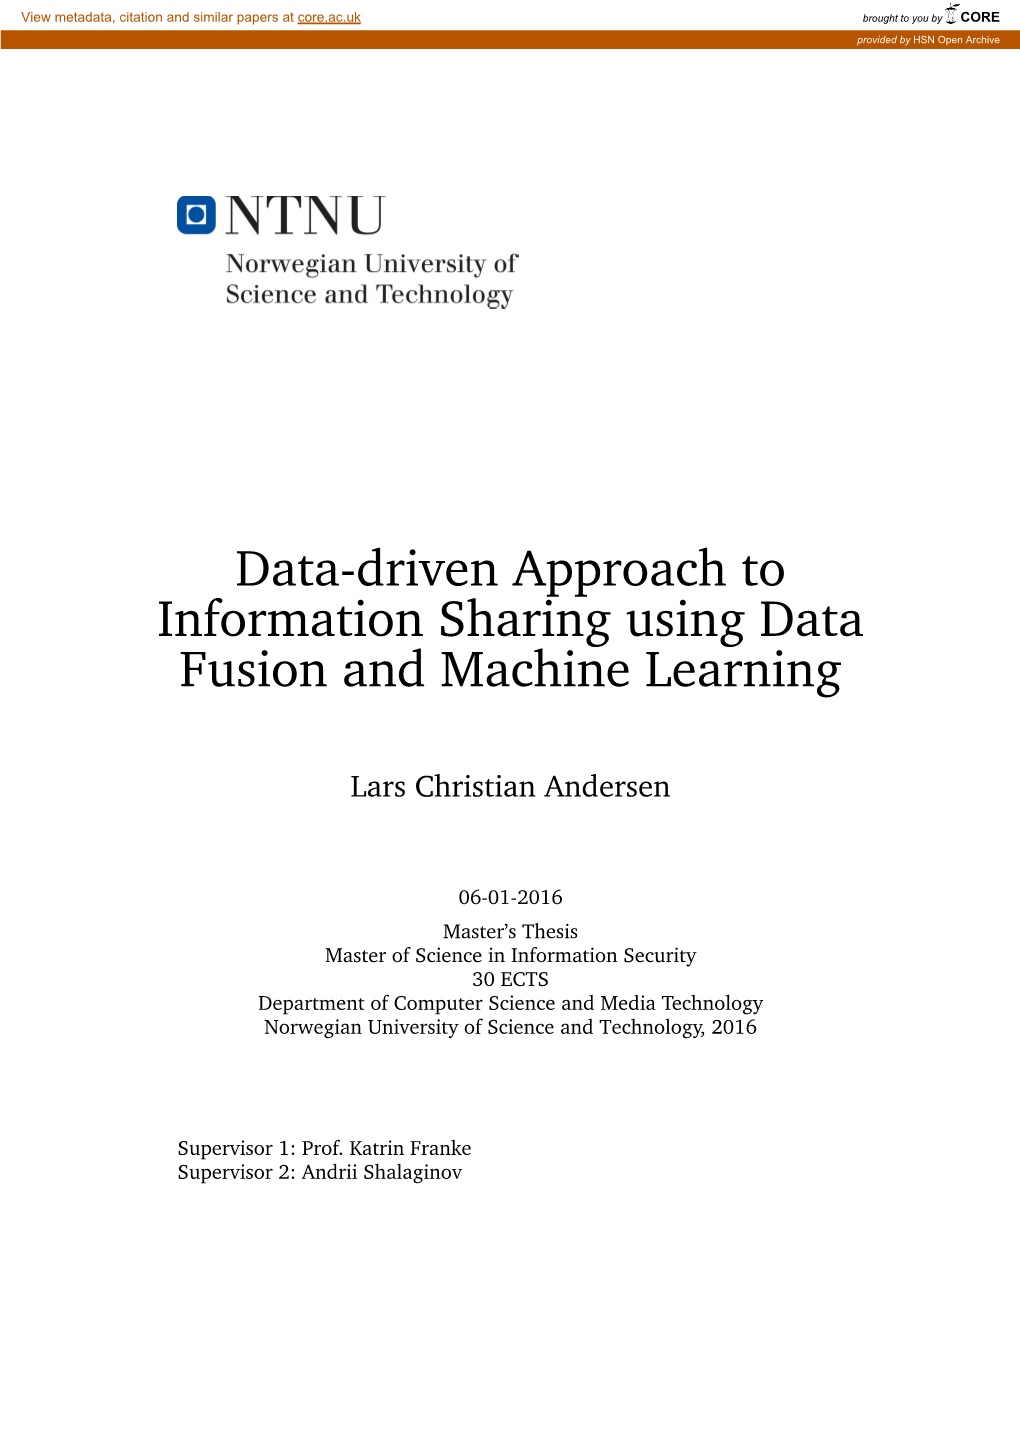 Data-Driven Approach to Information Sharing Using Data Fusion and Machine Learning